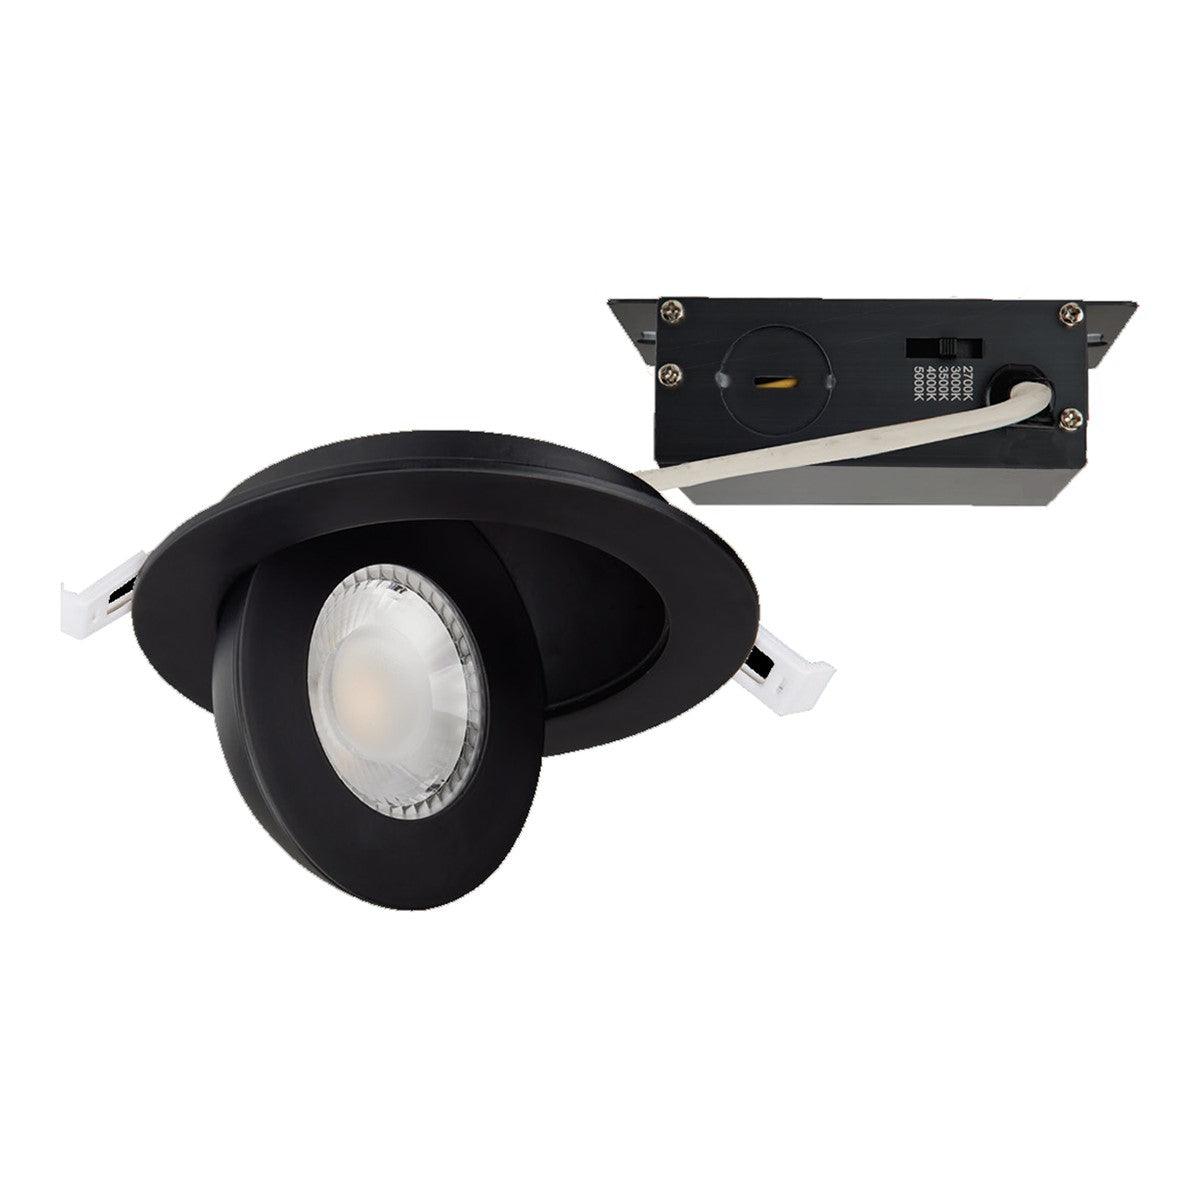 4 Inch Round Gimbal Downlight with Remote Driver, Round, 9 Watt, 750 Lumens, Selectable CCT, 2700K to 5000K, Black Finish